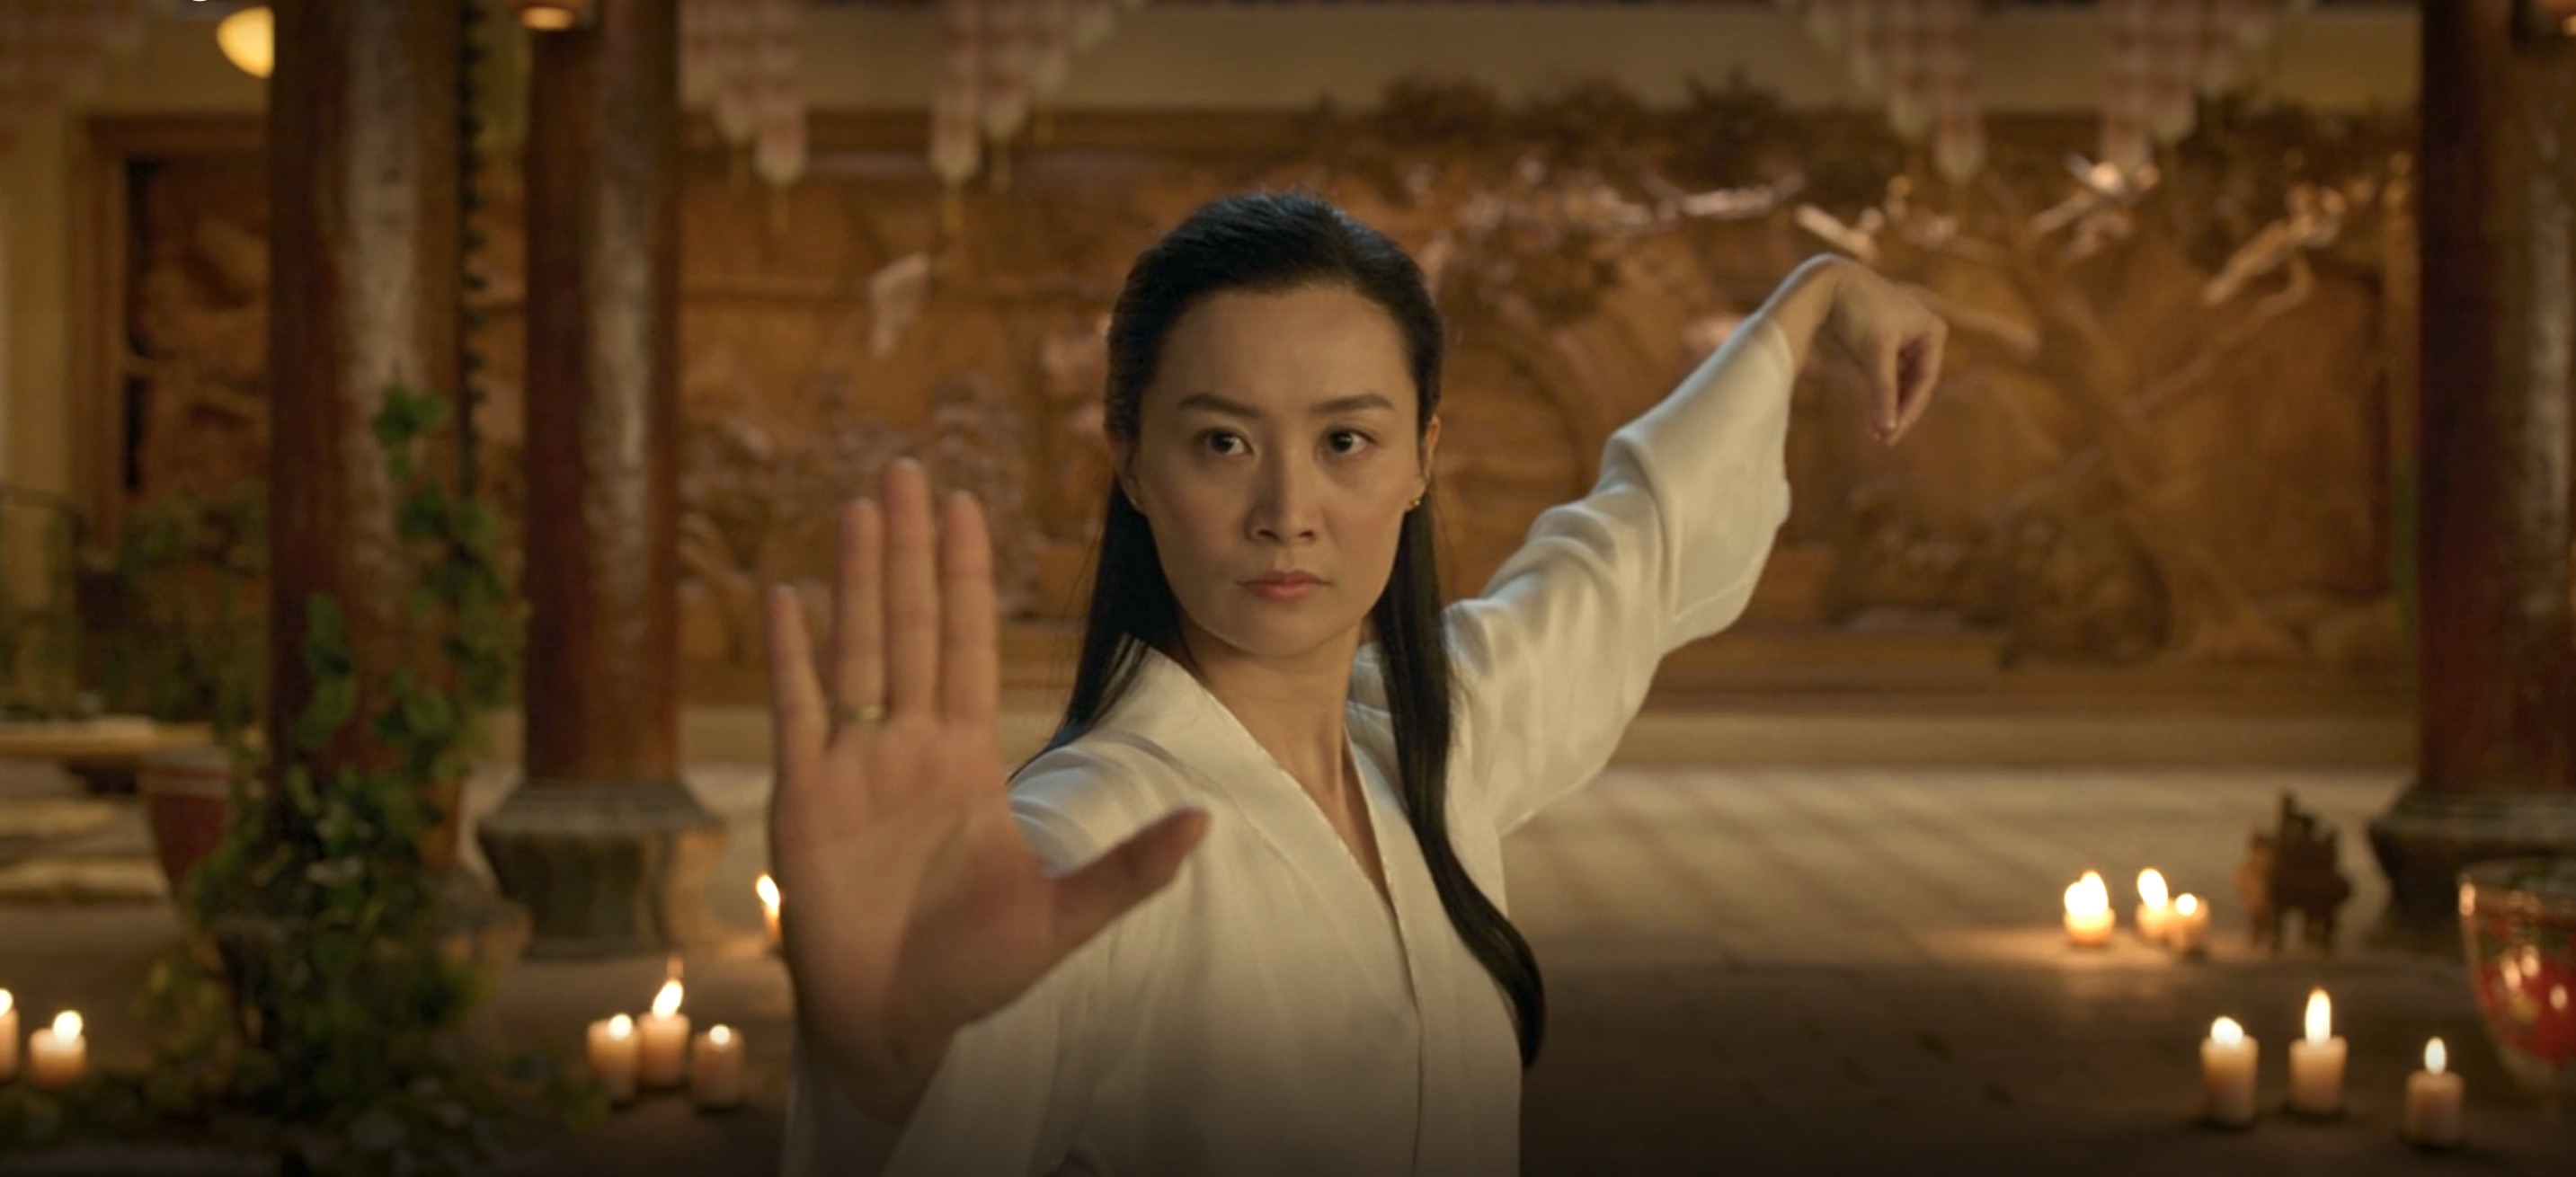 Shang-Chi and the Legend of the Ten Rings Cast - Fala Chen as Ying Li